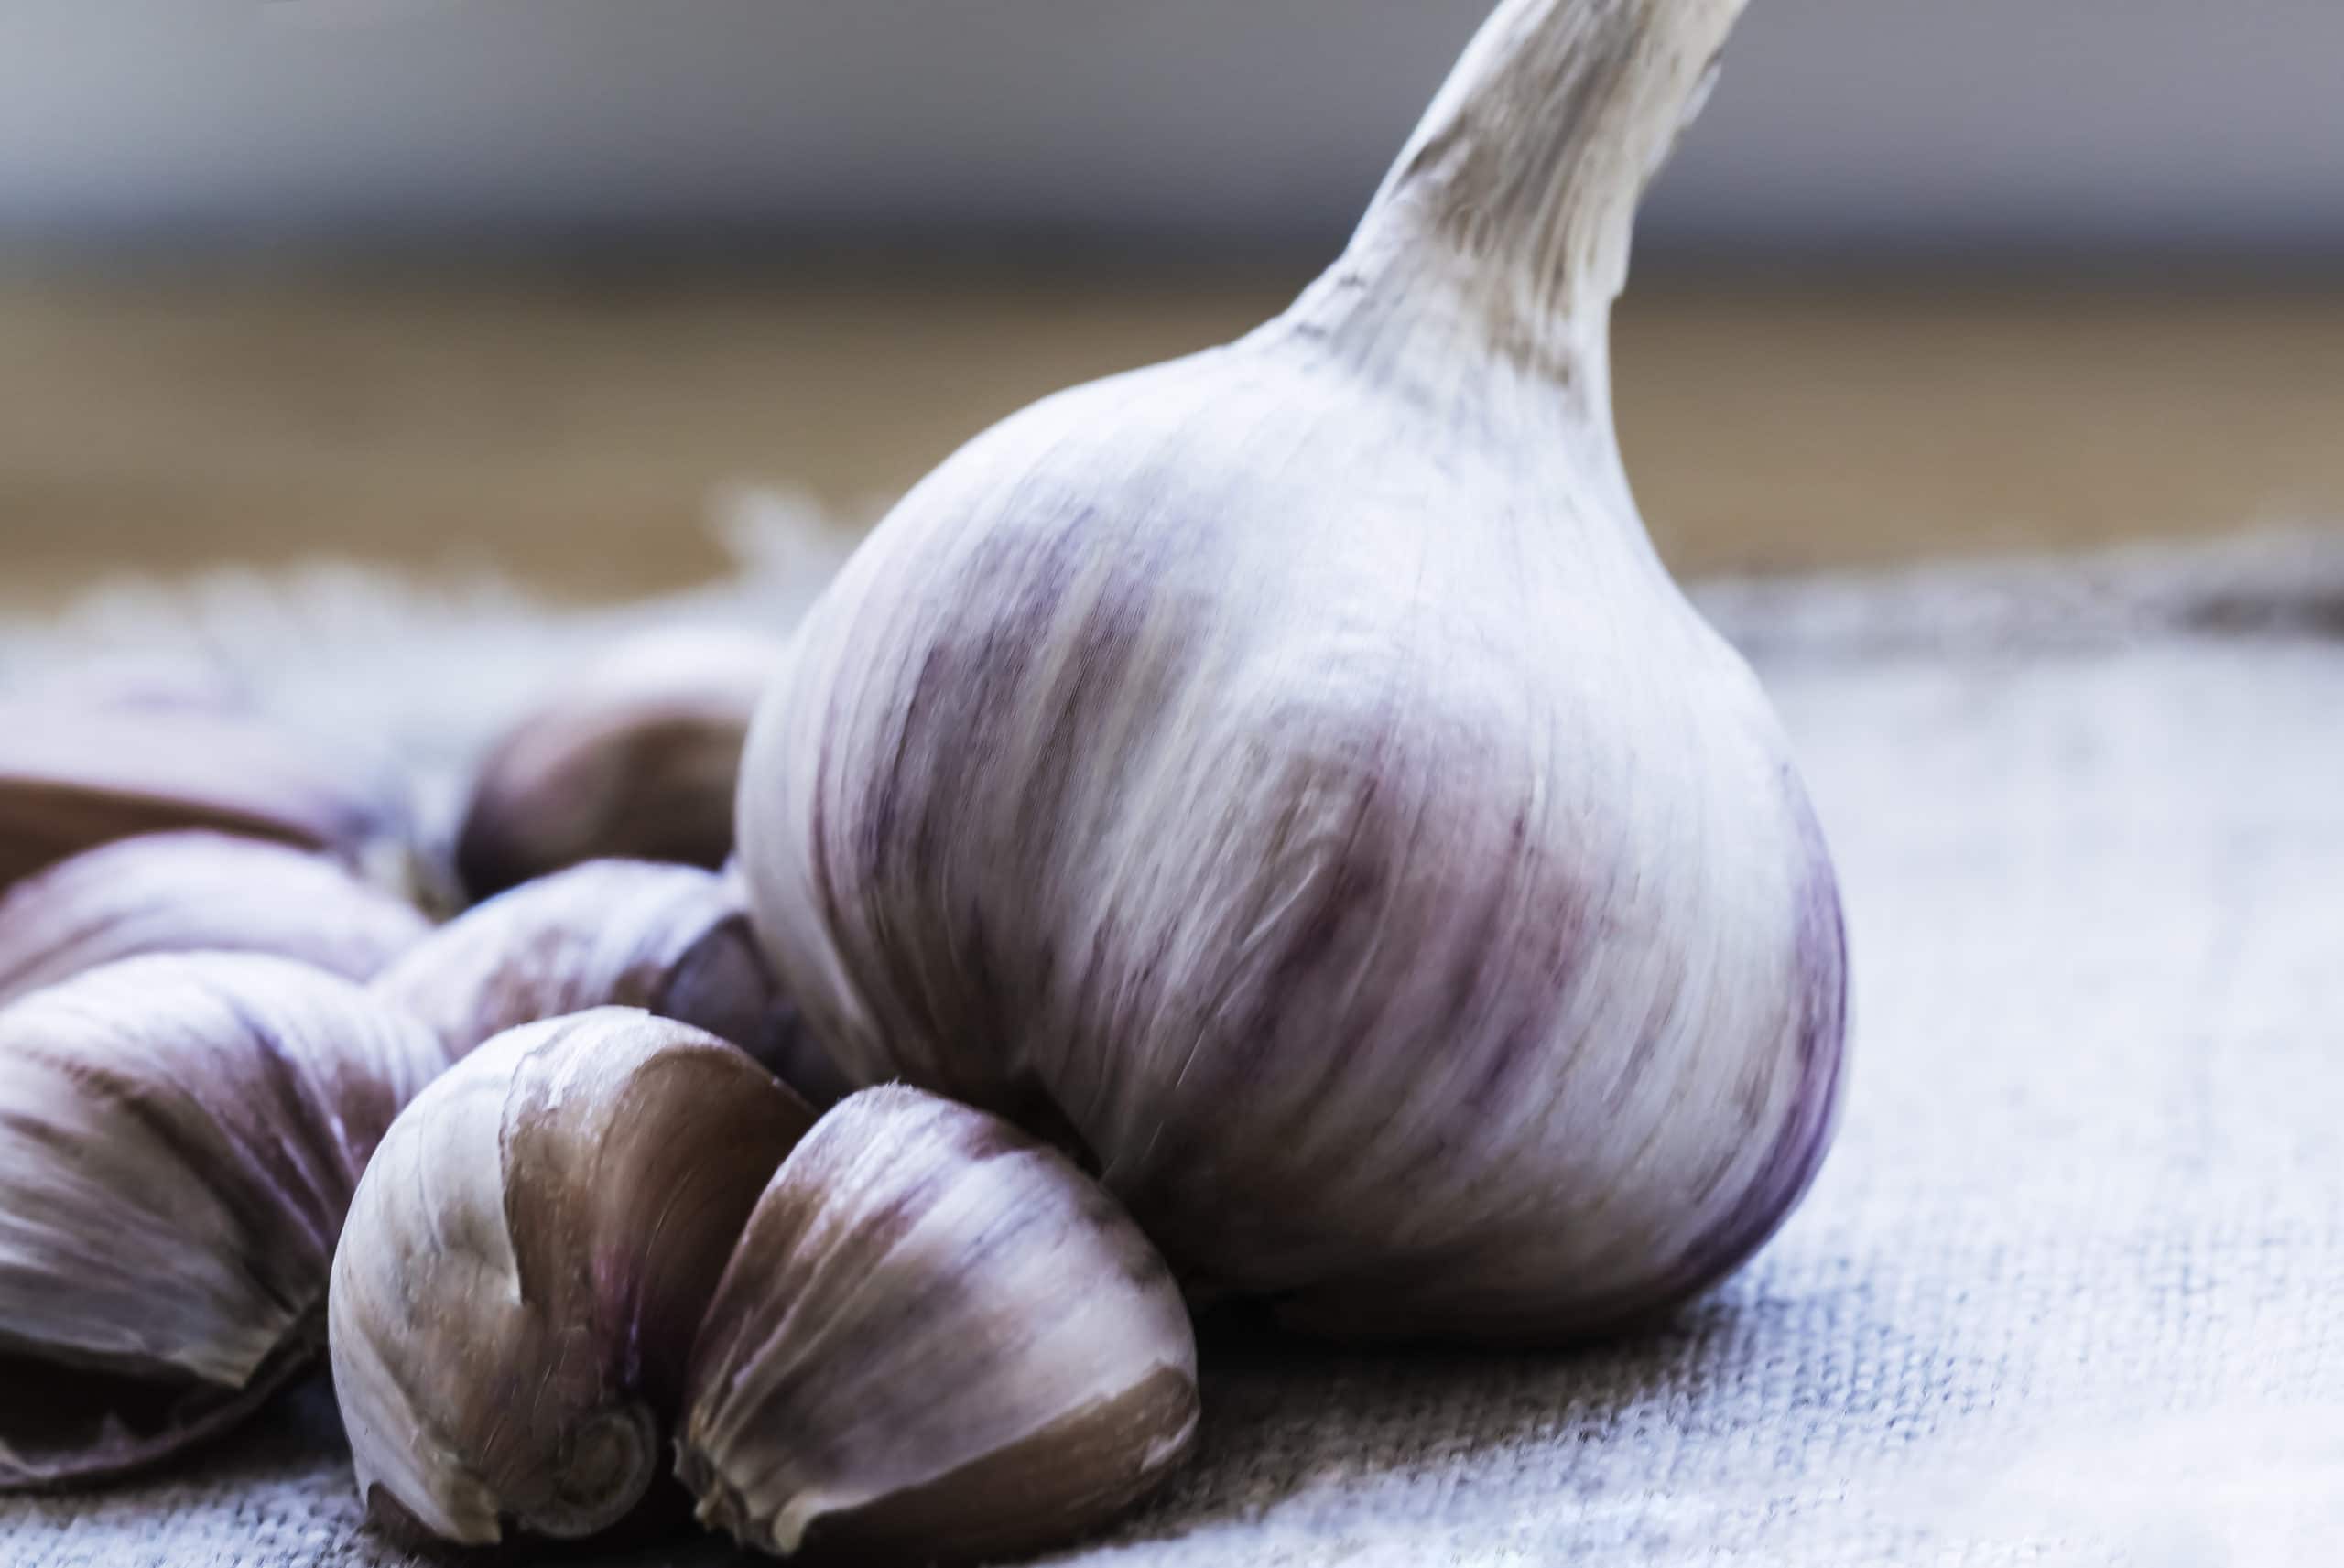 Garlic for Hair Growth Review: Does it Work? - Updated For 2023